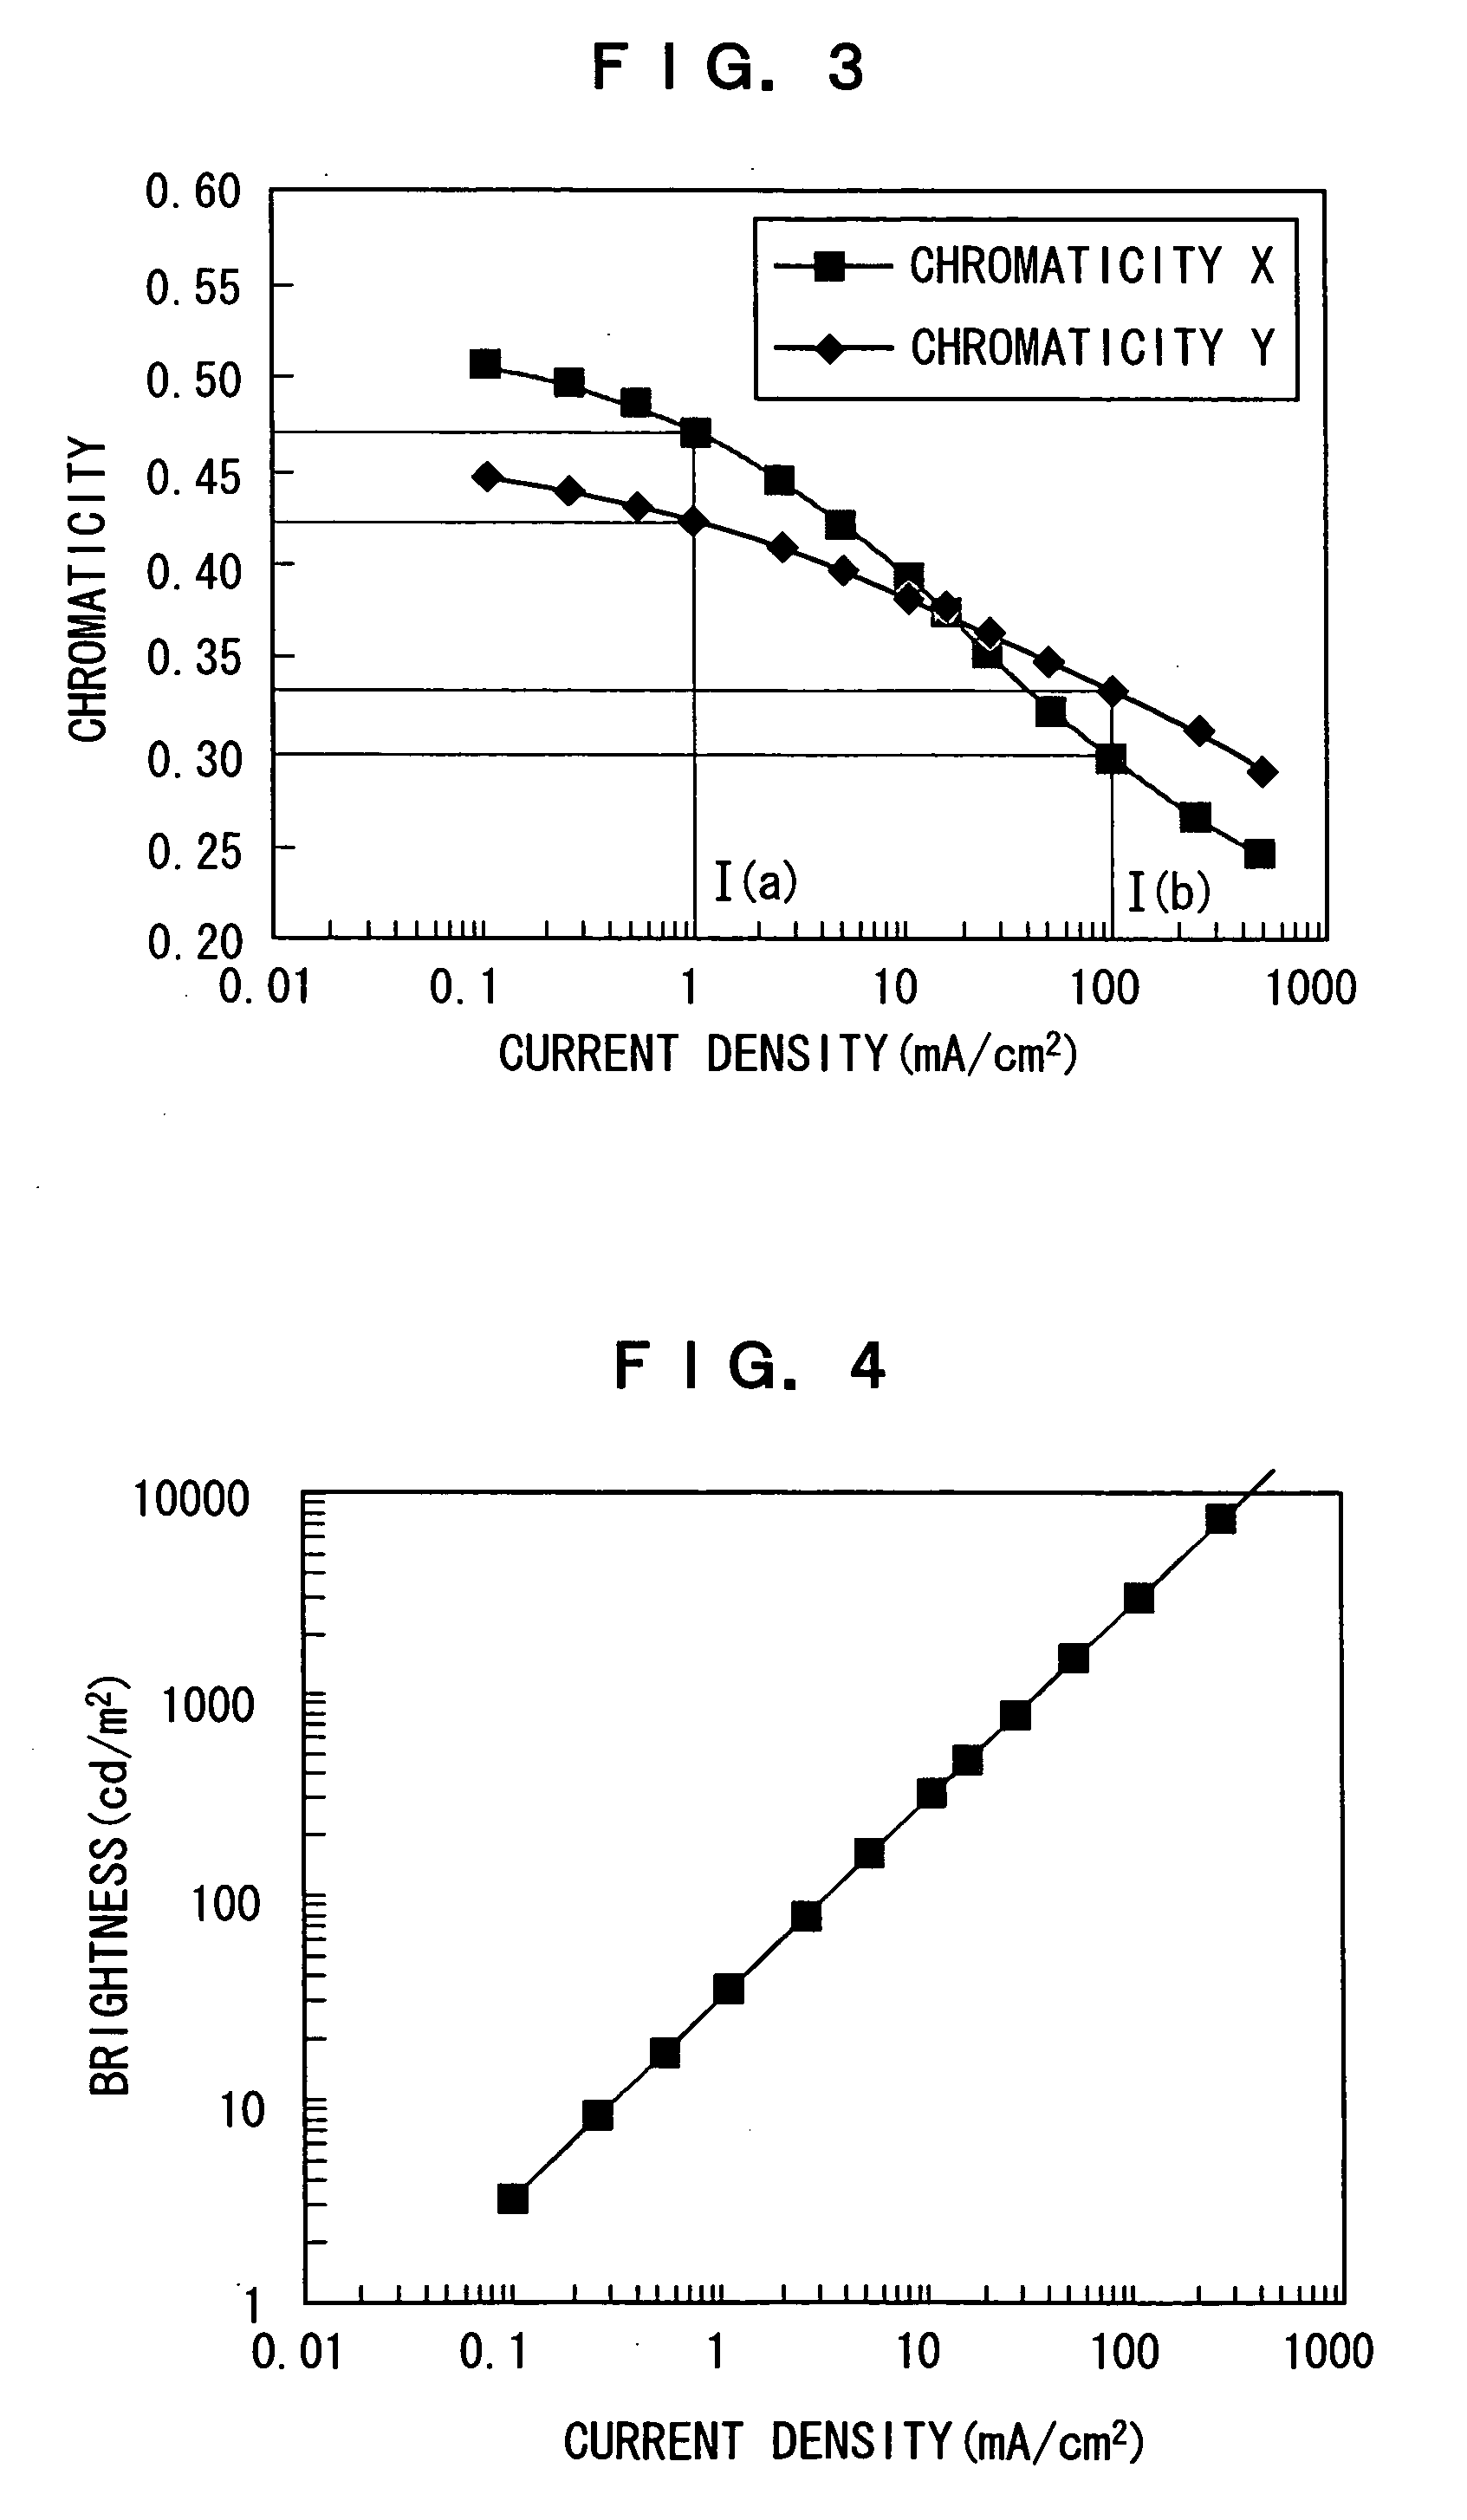 Organic Electroluminescent Device Allowing Adjustment of Chromaticity